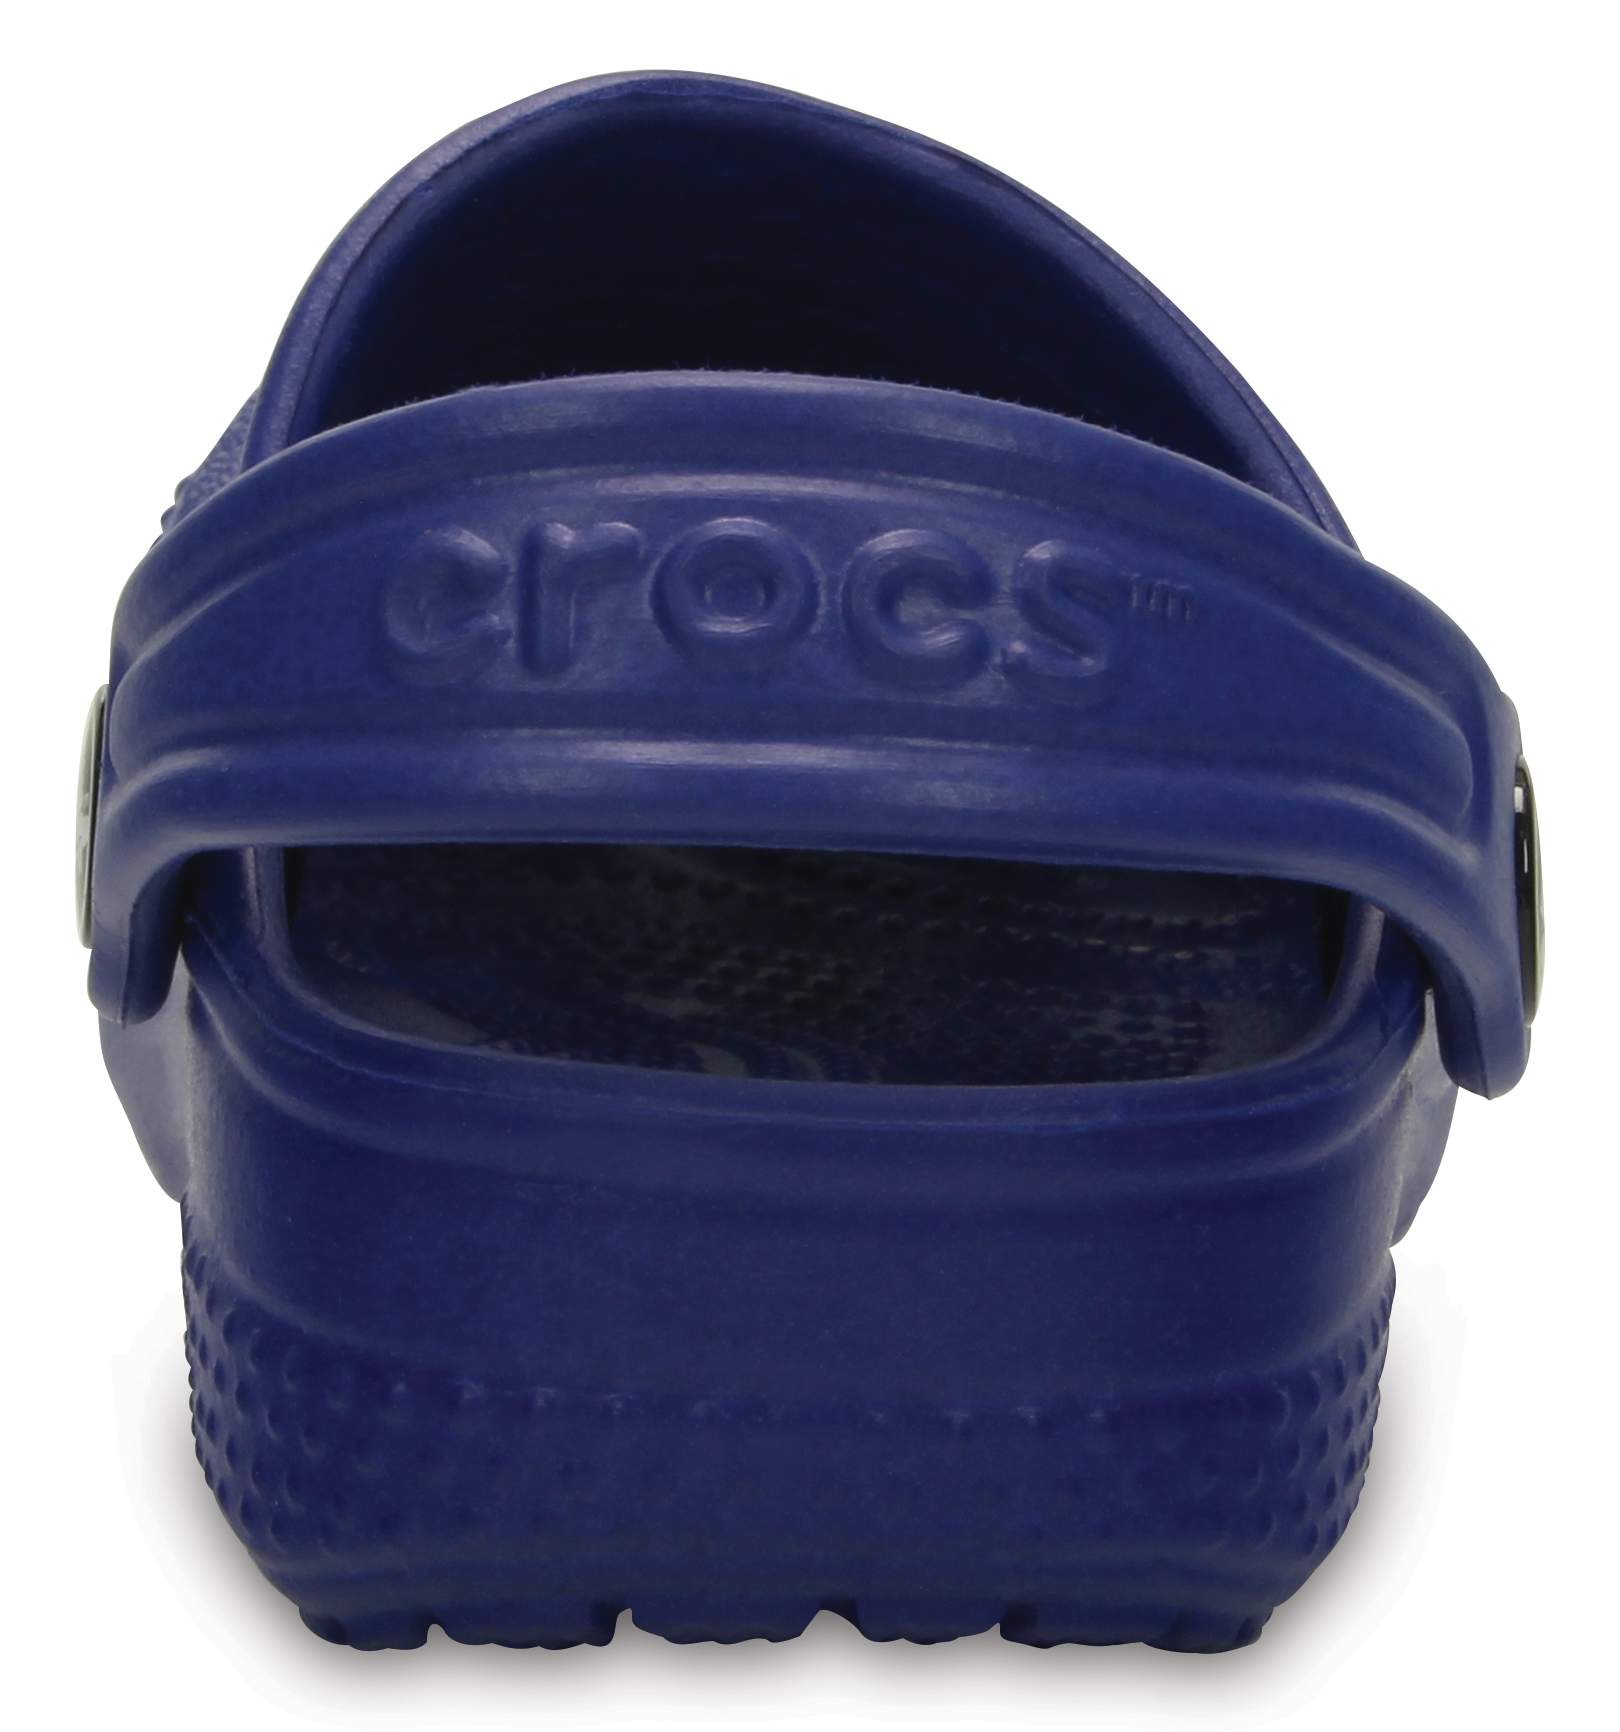 crocs size for 5 years old